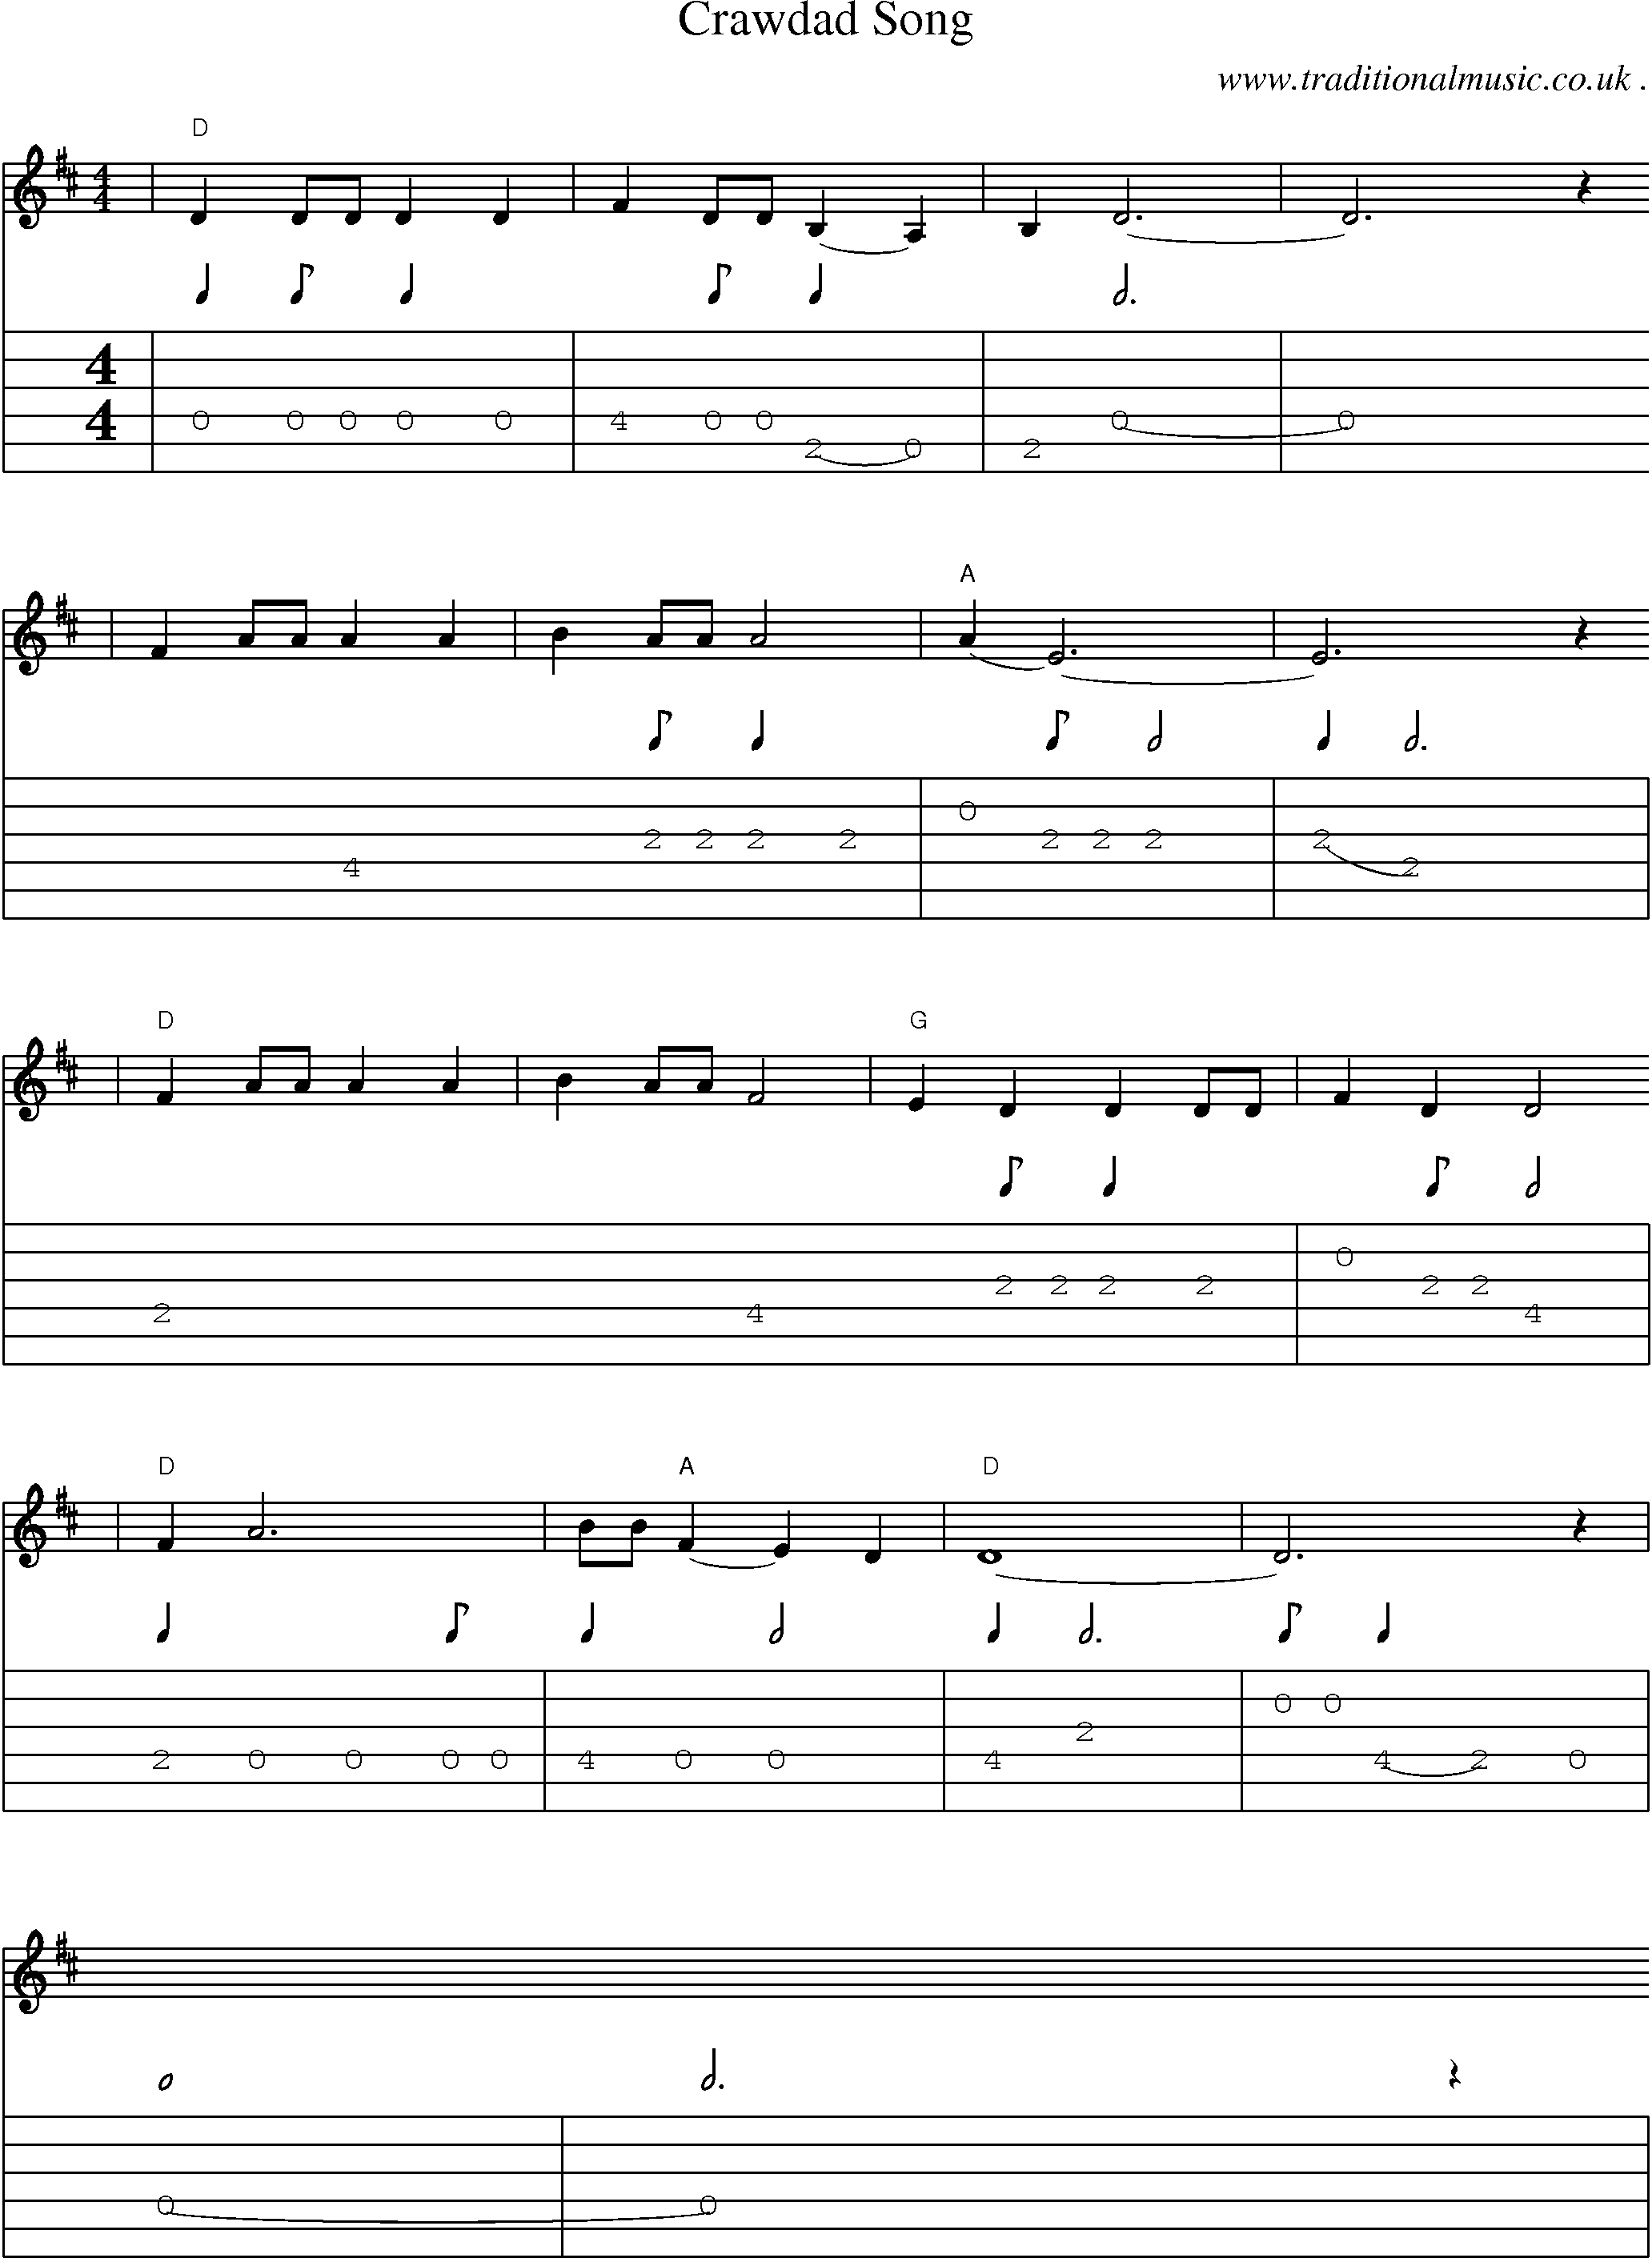 Music Score and Guitar Tabs for Crawdad Song